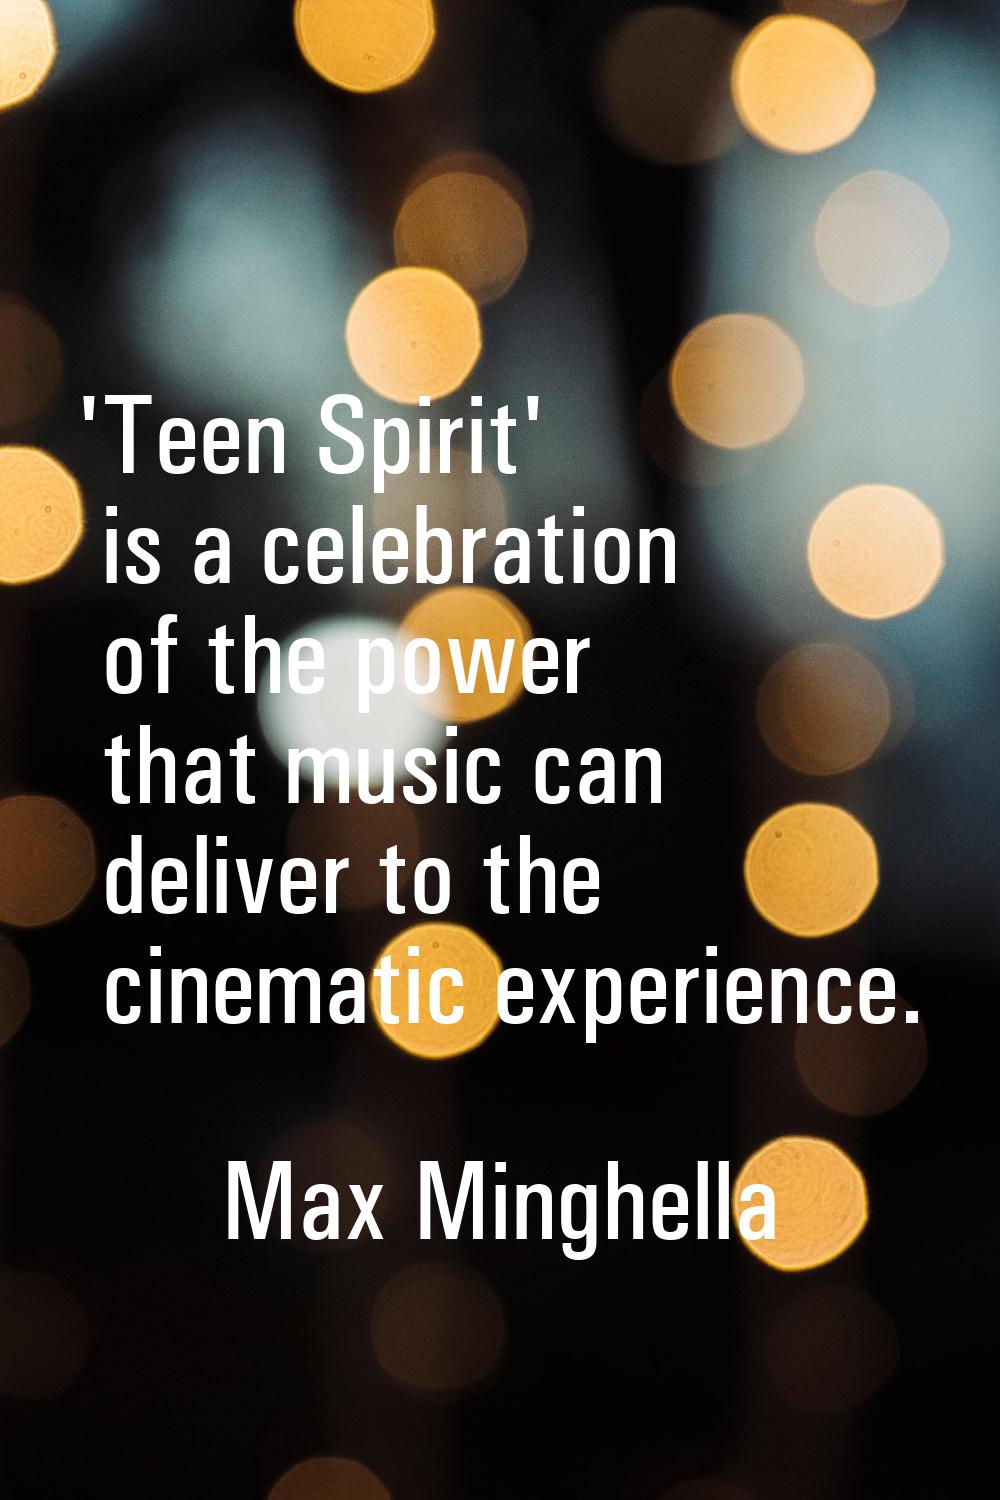 'Teen Spirit' is a celebration of the power that music can deliver to the cinematic experience.